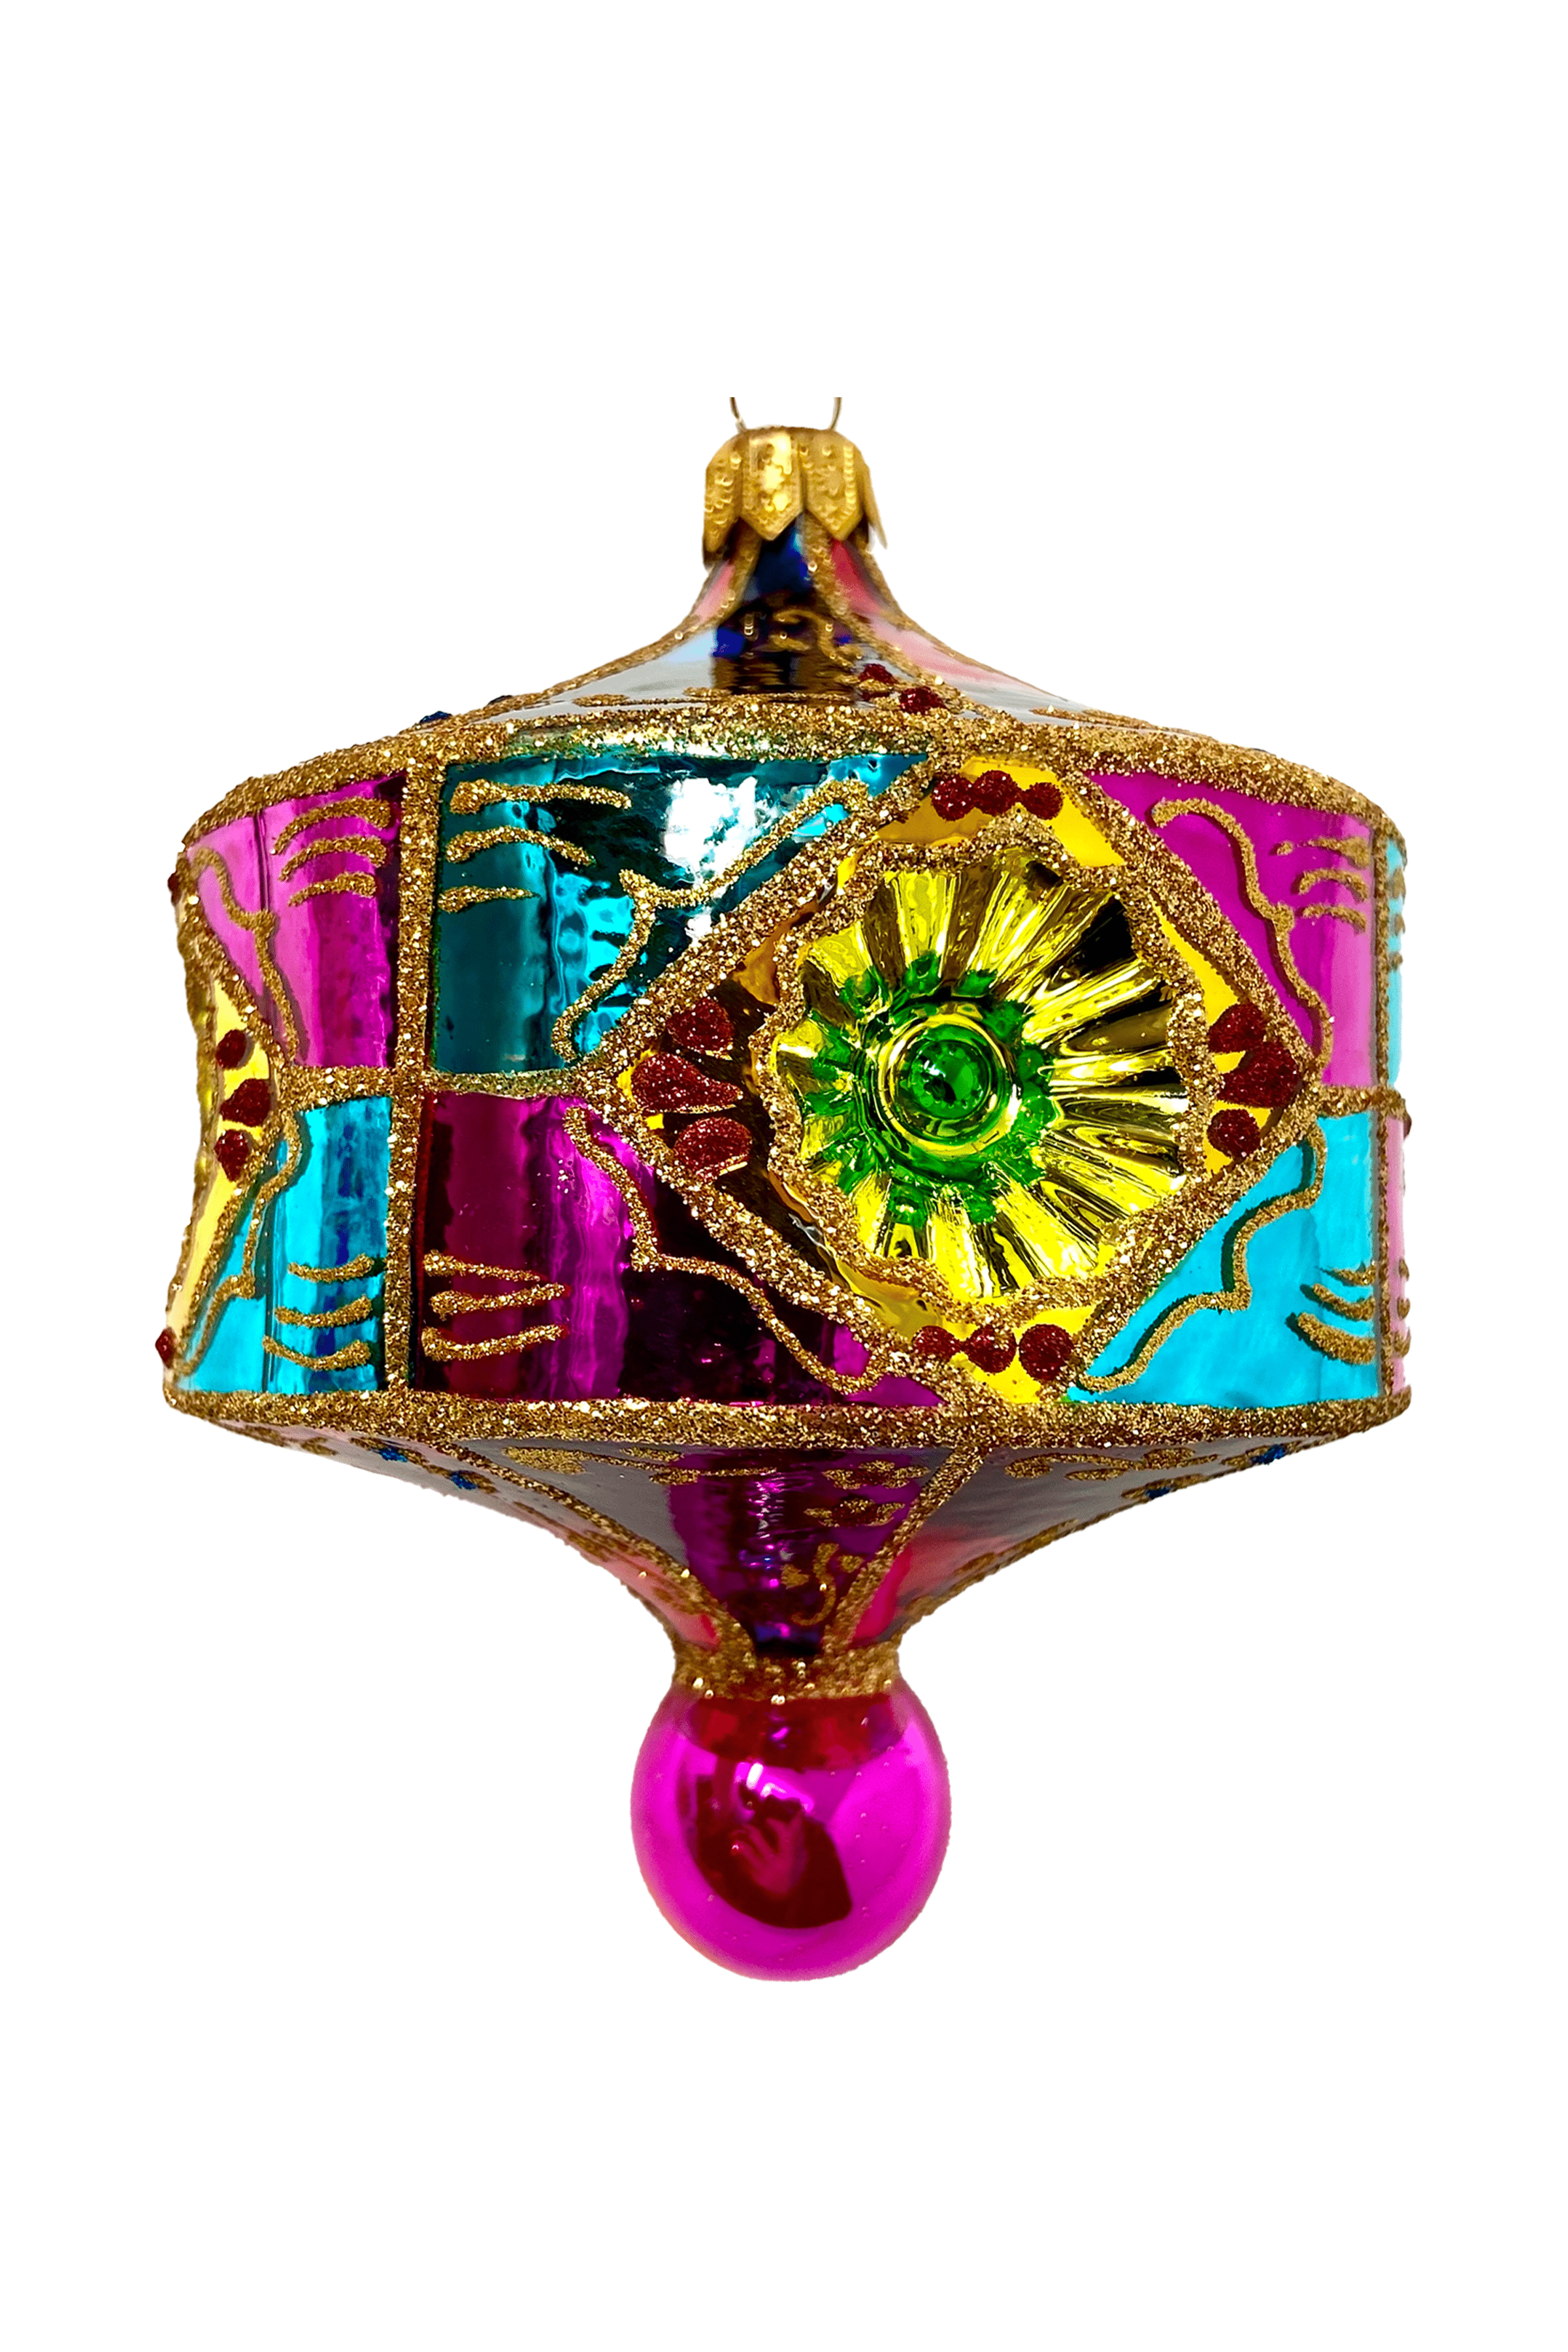 beautiful sicilian style glass ornament painted with vibrant colors and gold accents.